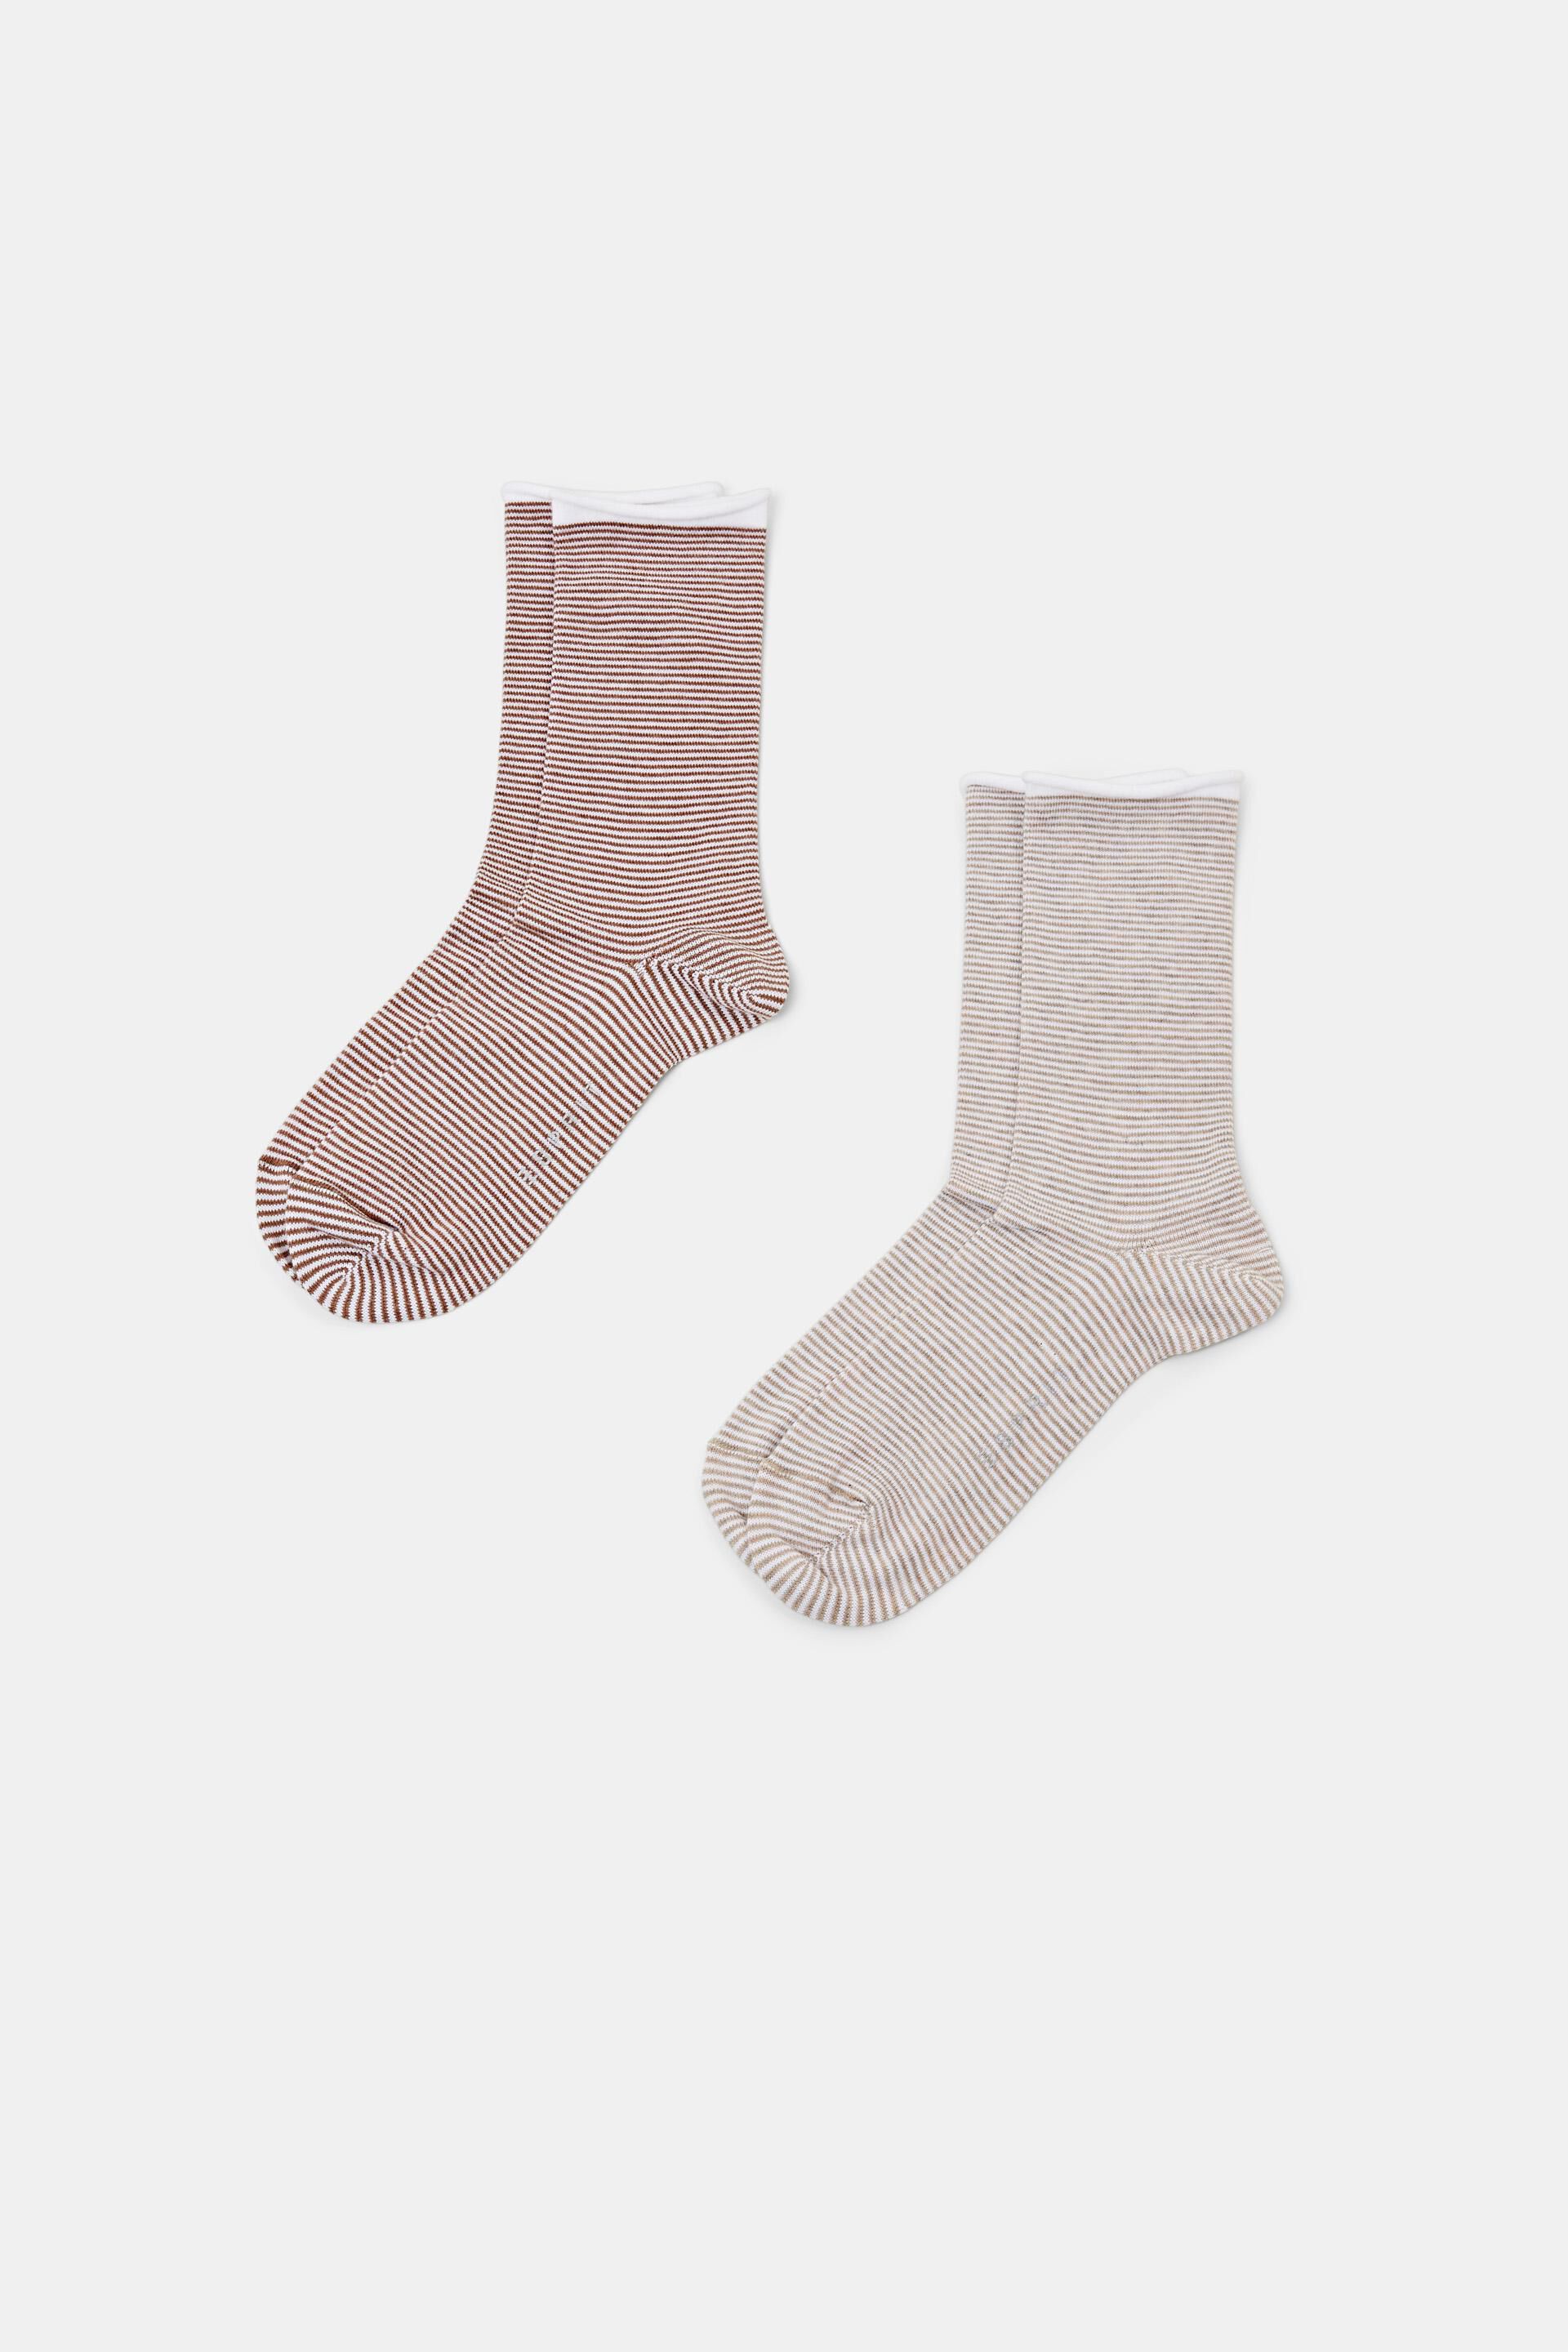 Esprit socks cotton organic Striped cuffs, with rolled